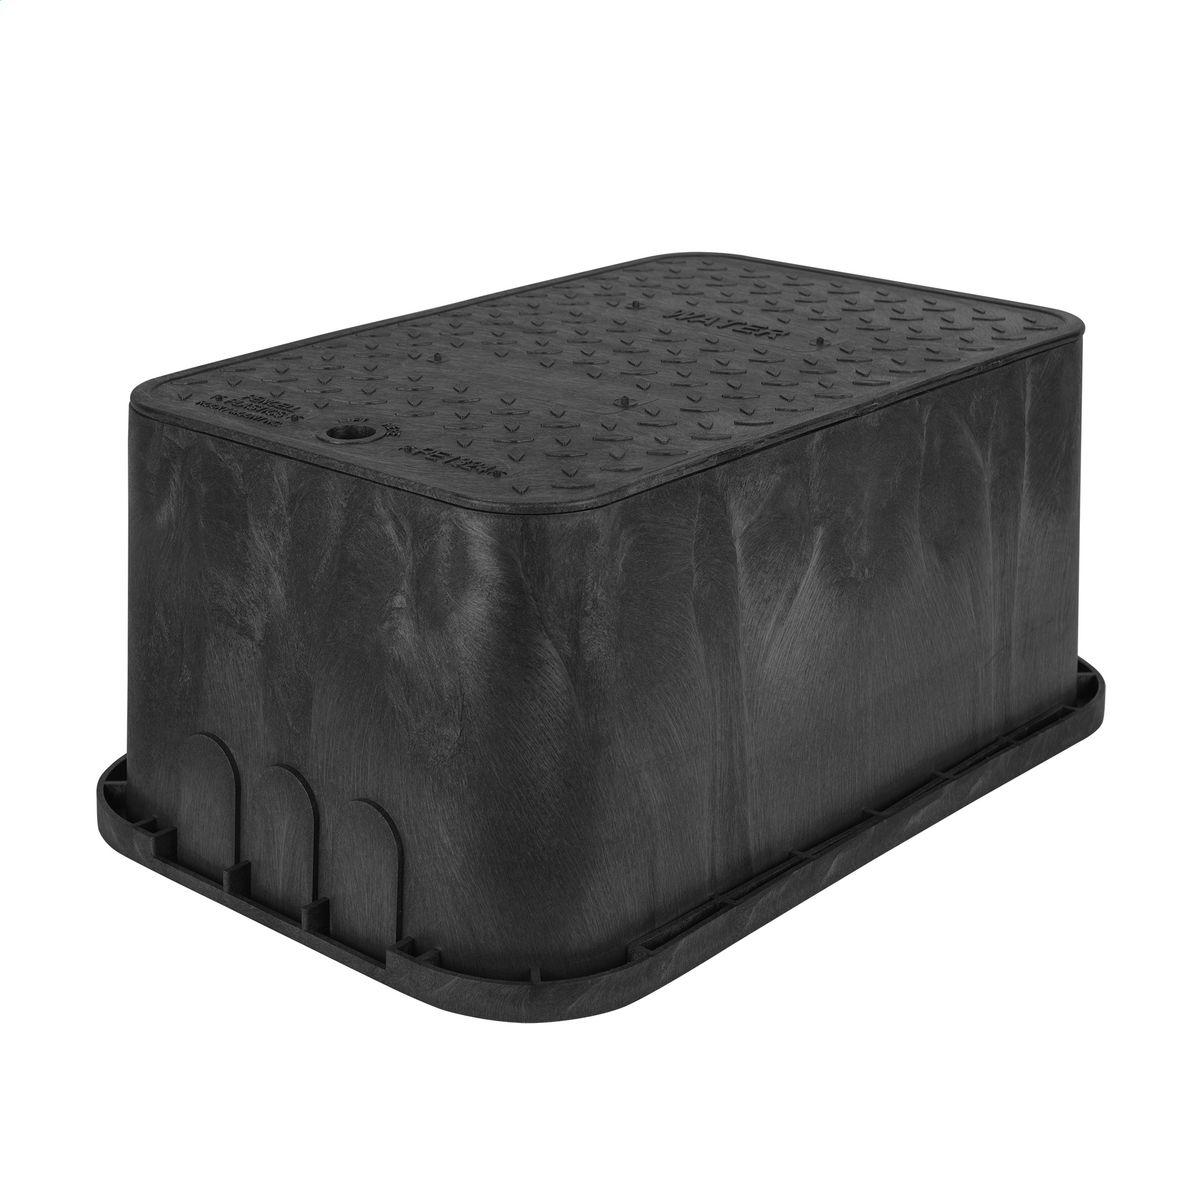 Hubbell PE1730HB000009 Assembly, Black, HDPE Box and Cover, Pedestrian, 17" x 30" x 12", Non-Bolt Down 